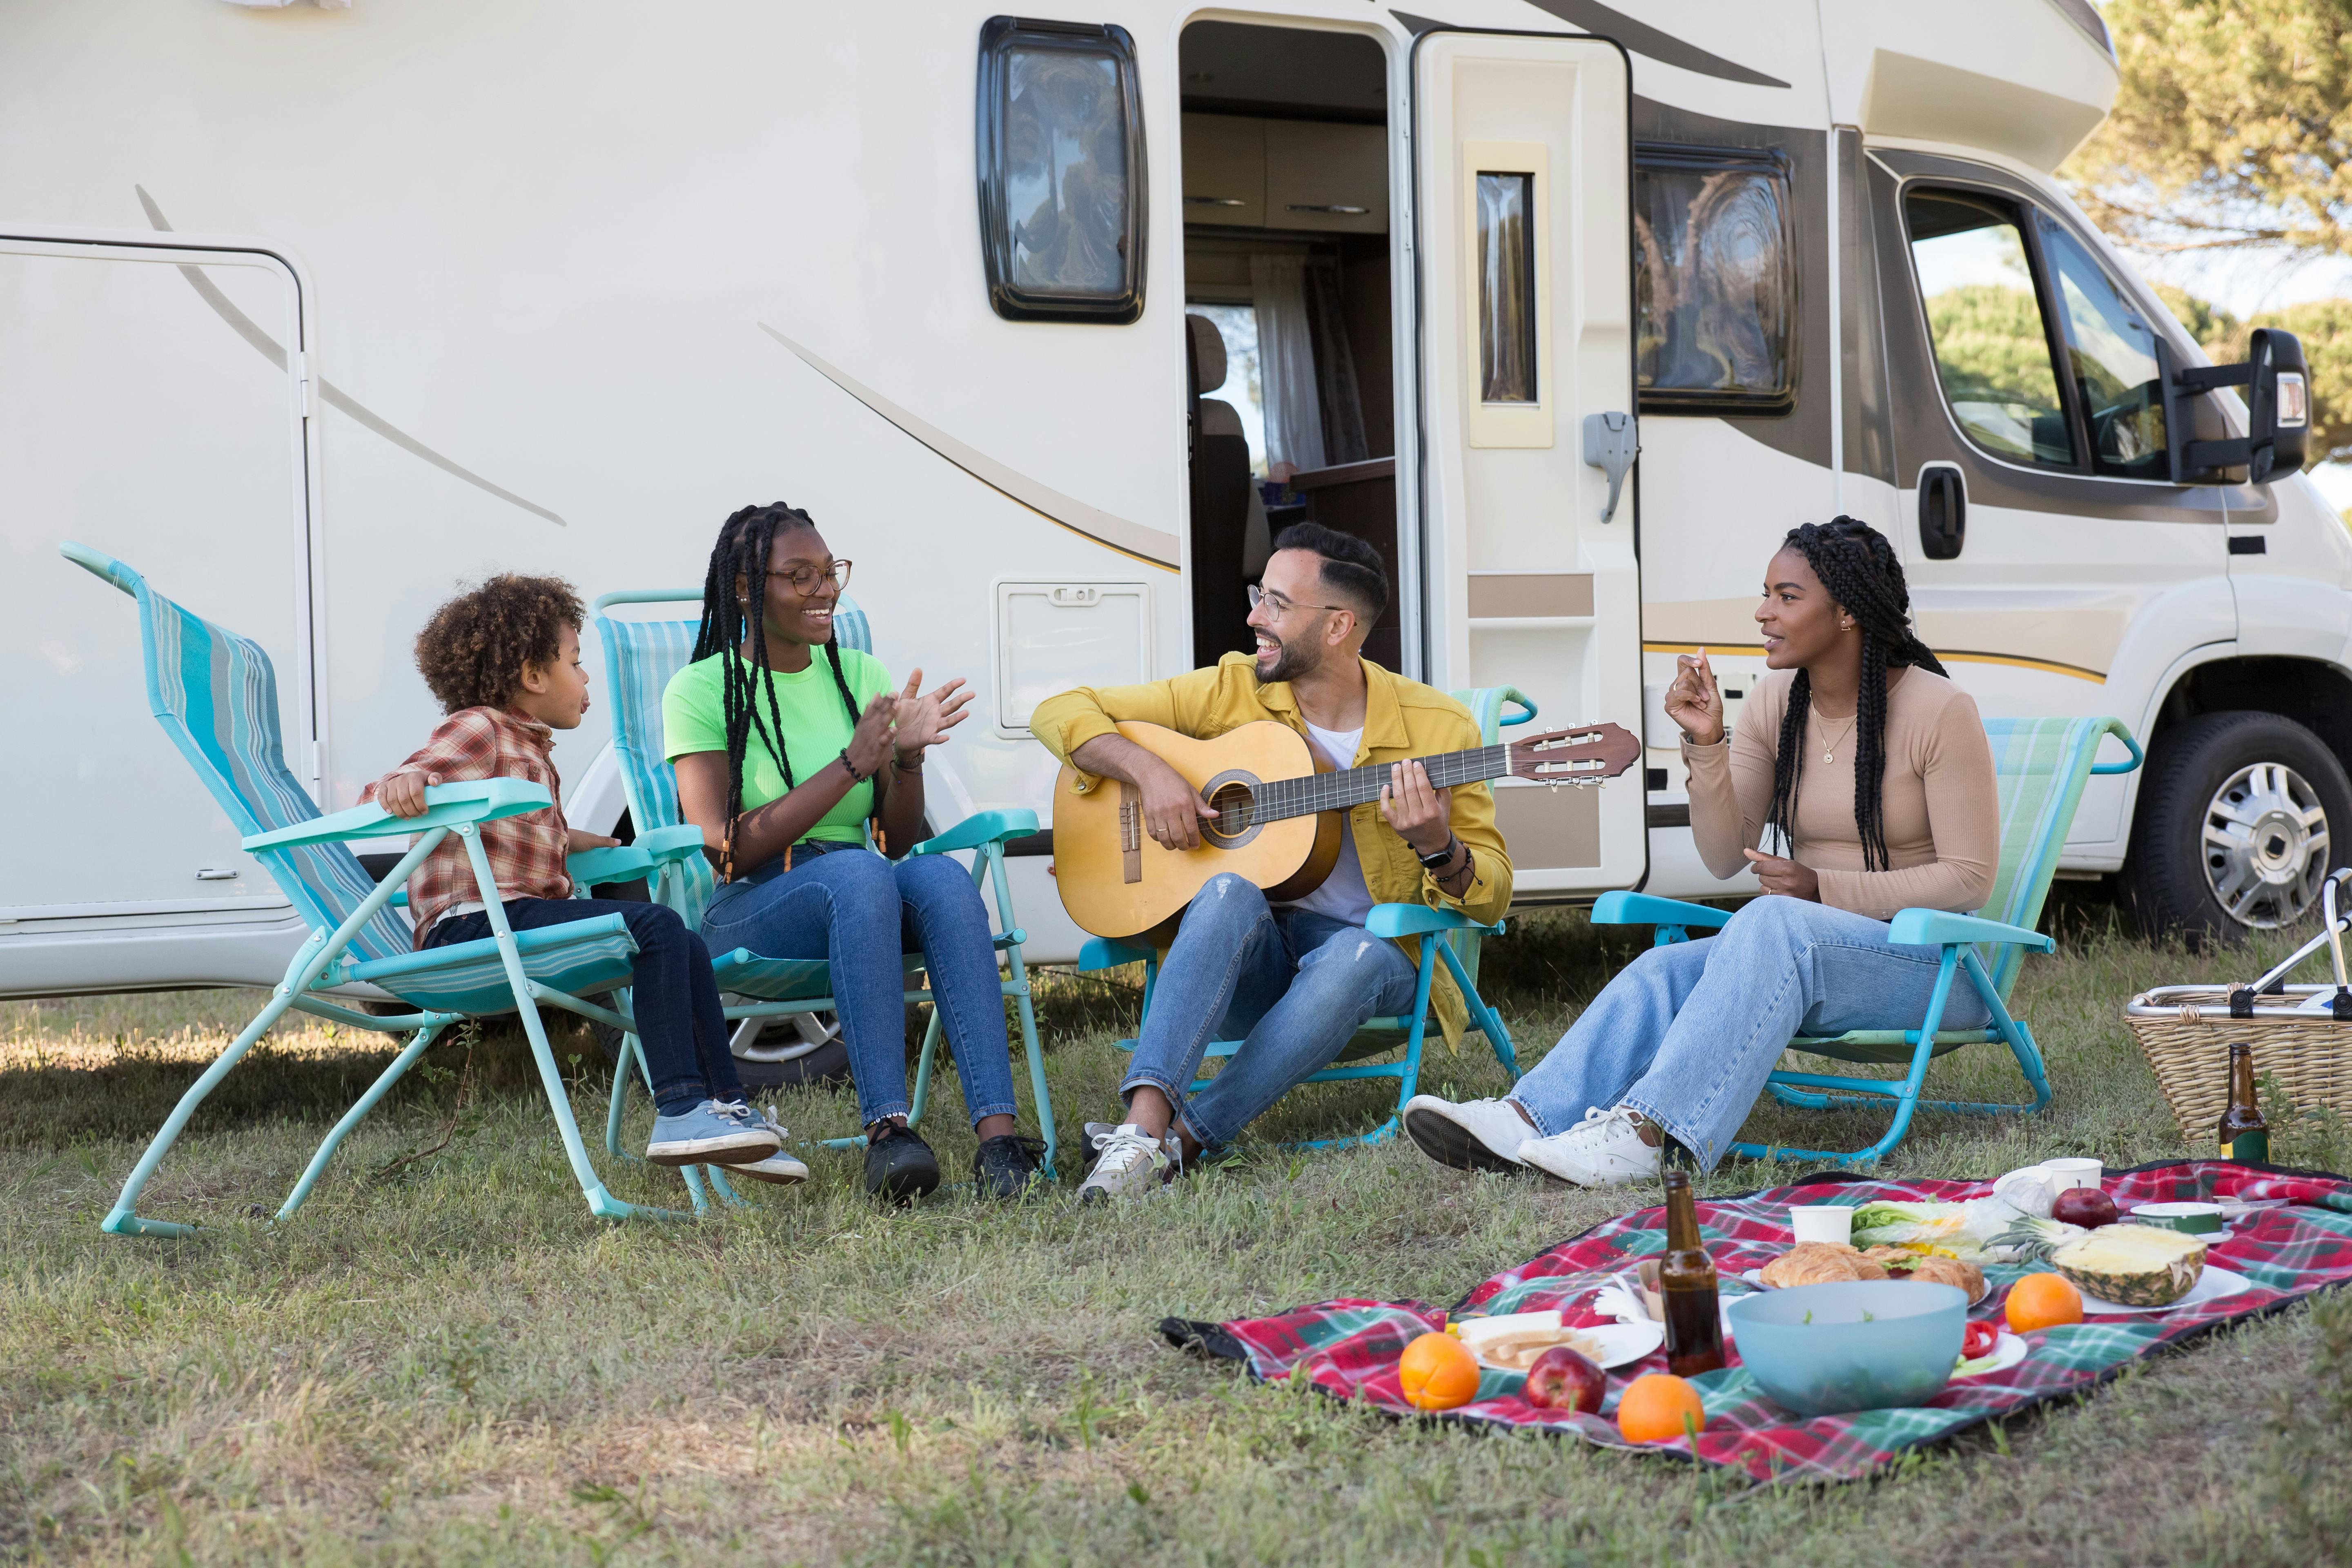 A family sitting in front of their RV in lawn chairs and singing.